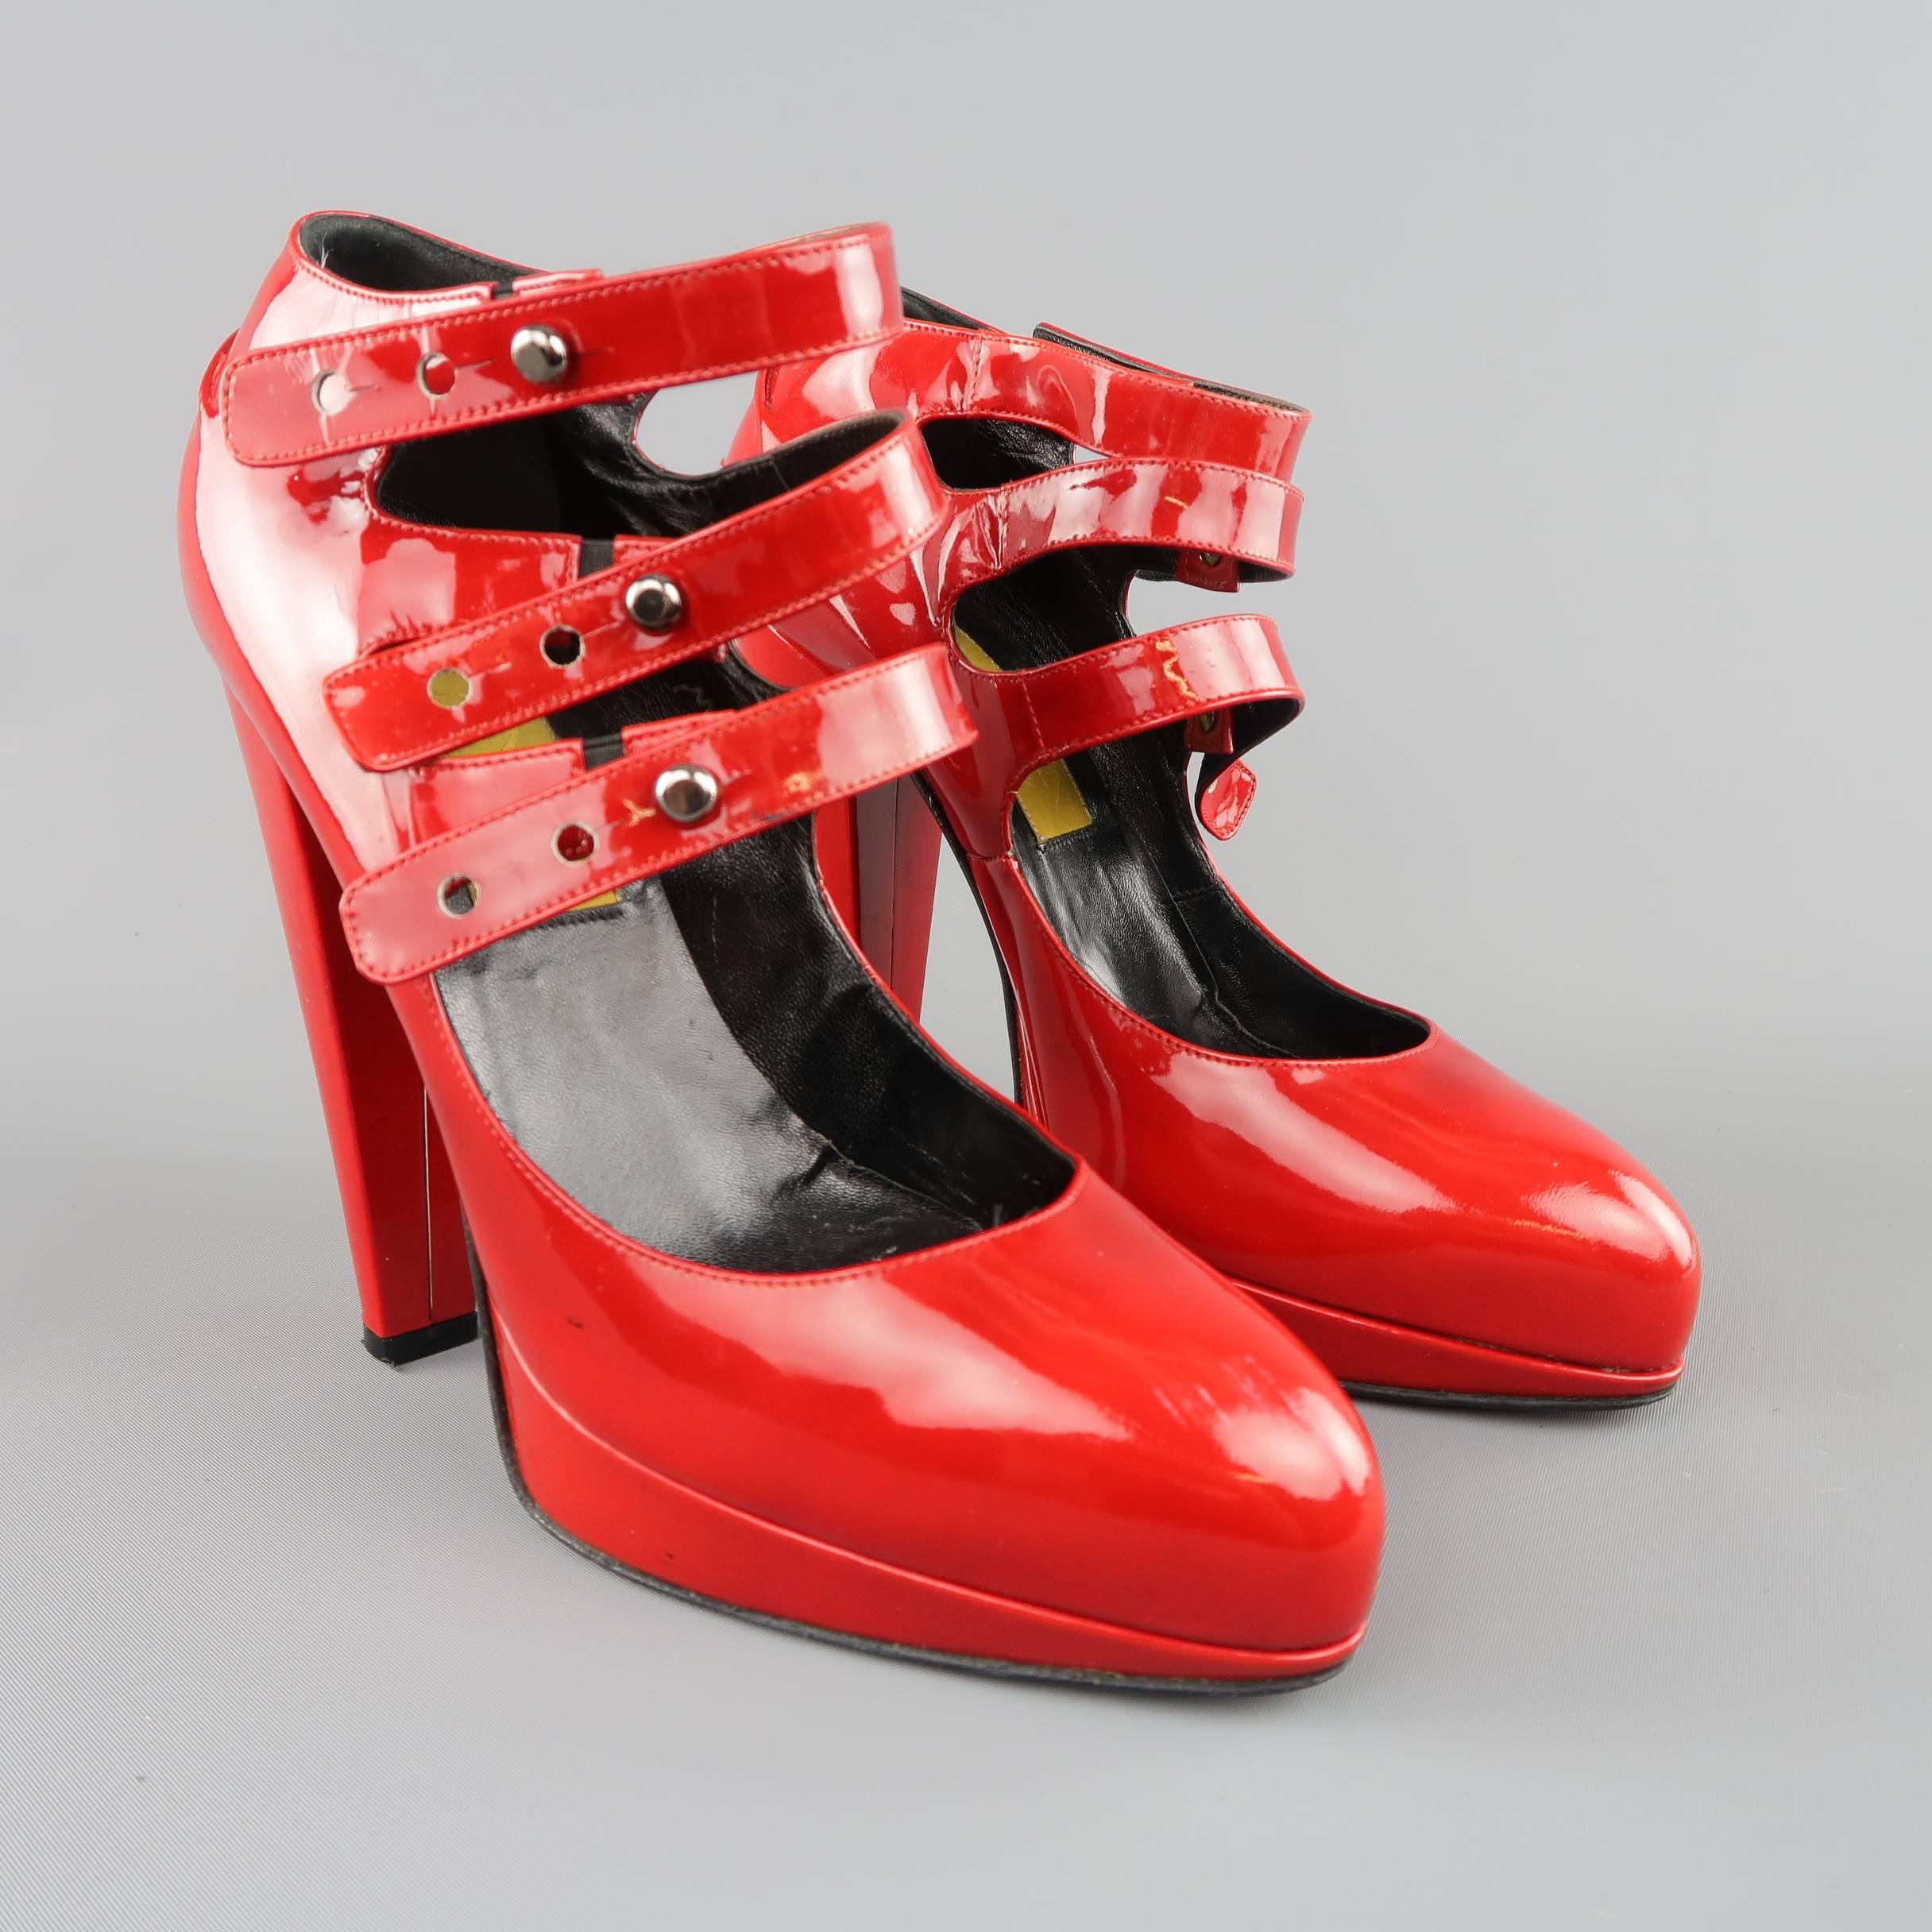 LANVIN funway pumps come in bold red patent leather and feature a pointed toe, chunky covered heel, and triple Mary Jane straps. Scuffs shown in detail shots. As-Is. Made in Italy.
 
Fair Pre-Owned Condition.
Marked: IT 36
 
Heel: 5 in.
Platform: 1